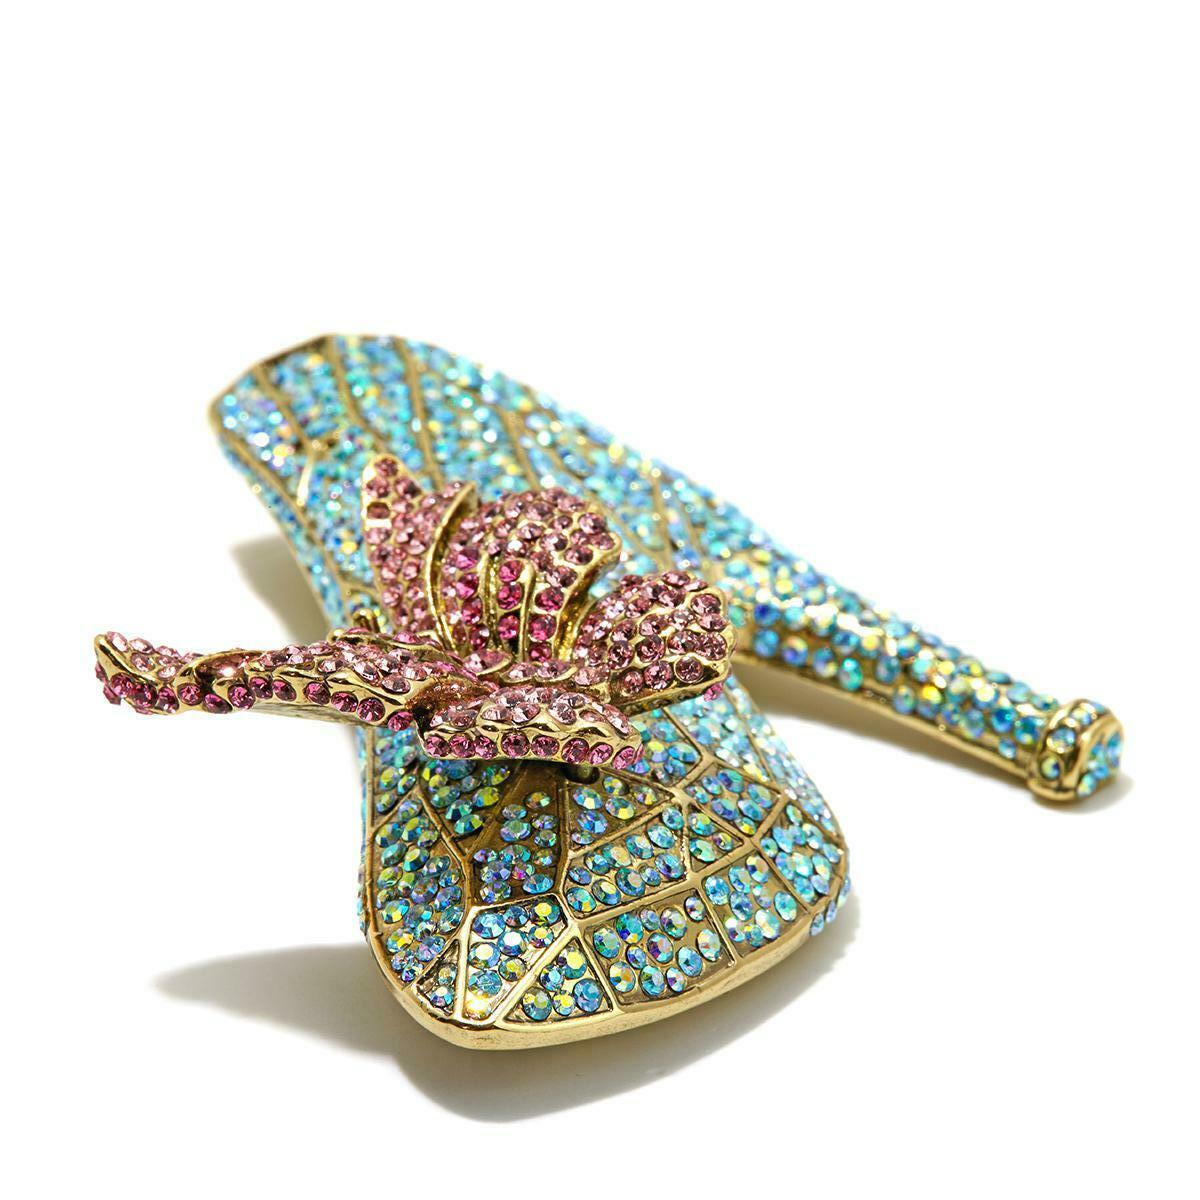 Modern Heidi Daus If the Shoe Fits Glass Slipper Pin the Cinderella Collection For Sale